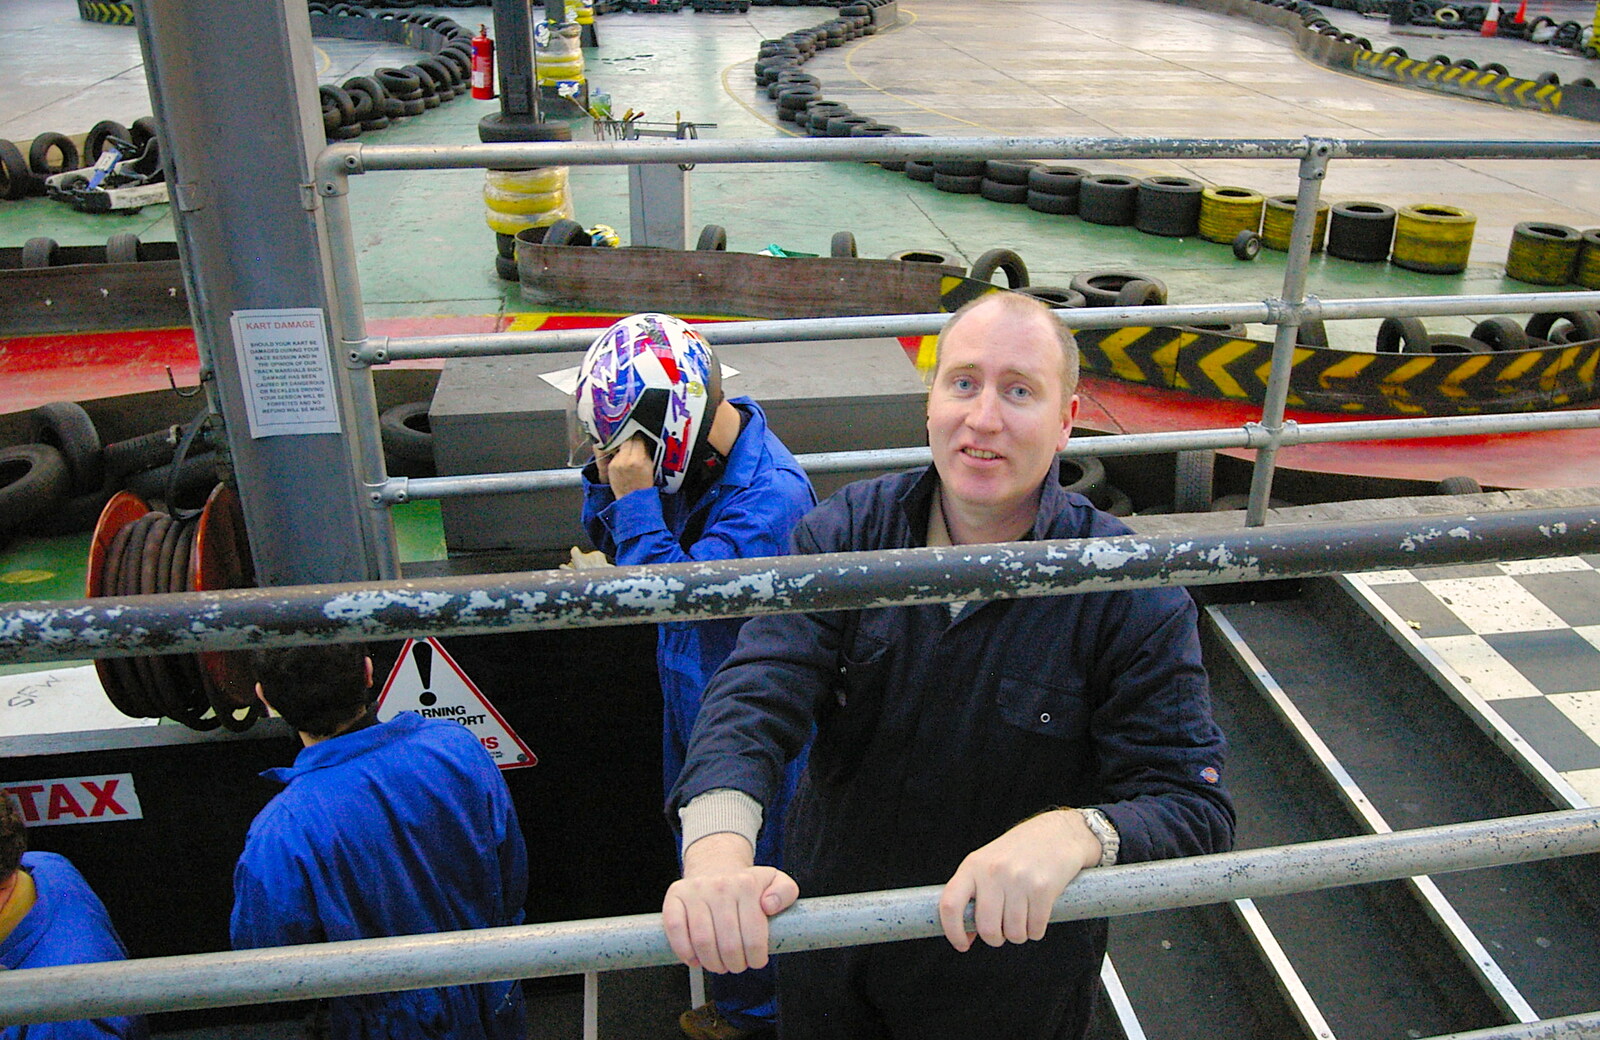 Russell McHugh hangs off a railing from Qualcomm goes Karting in Caxton, Cambridgeshire - 7th November 2005